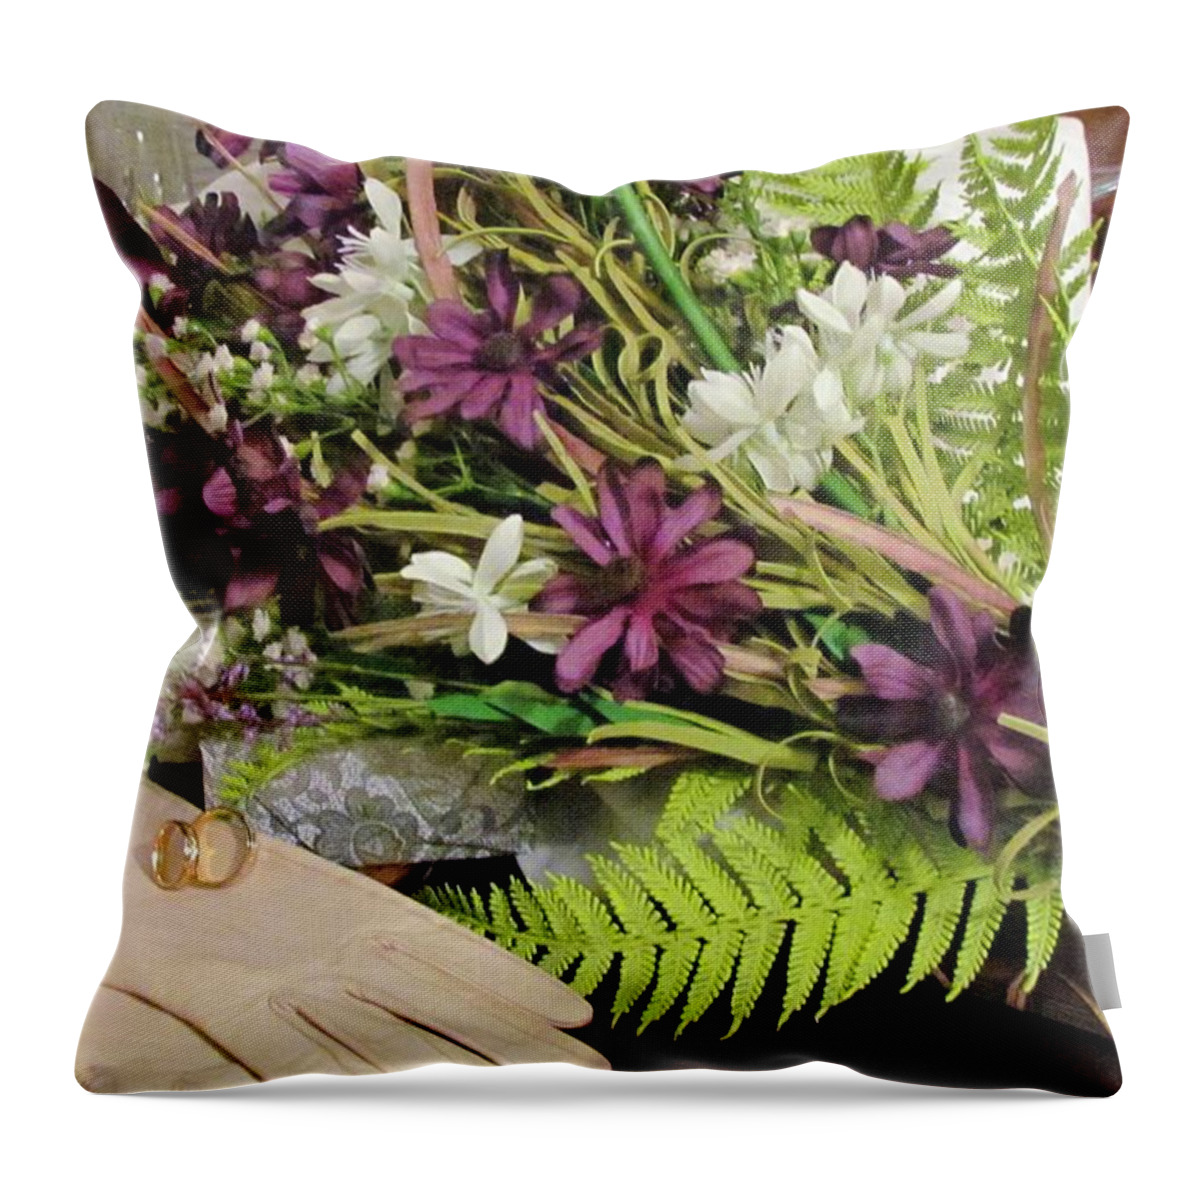 Love Throw Pillow featuring the photograph The Bride To Be by Cynthia Guinn